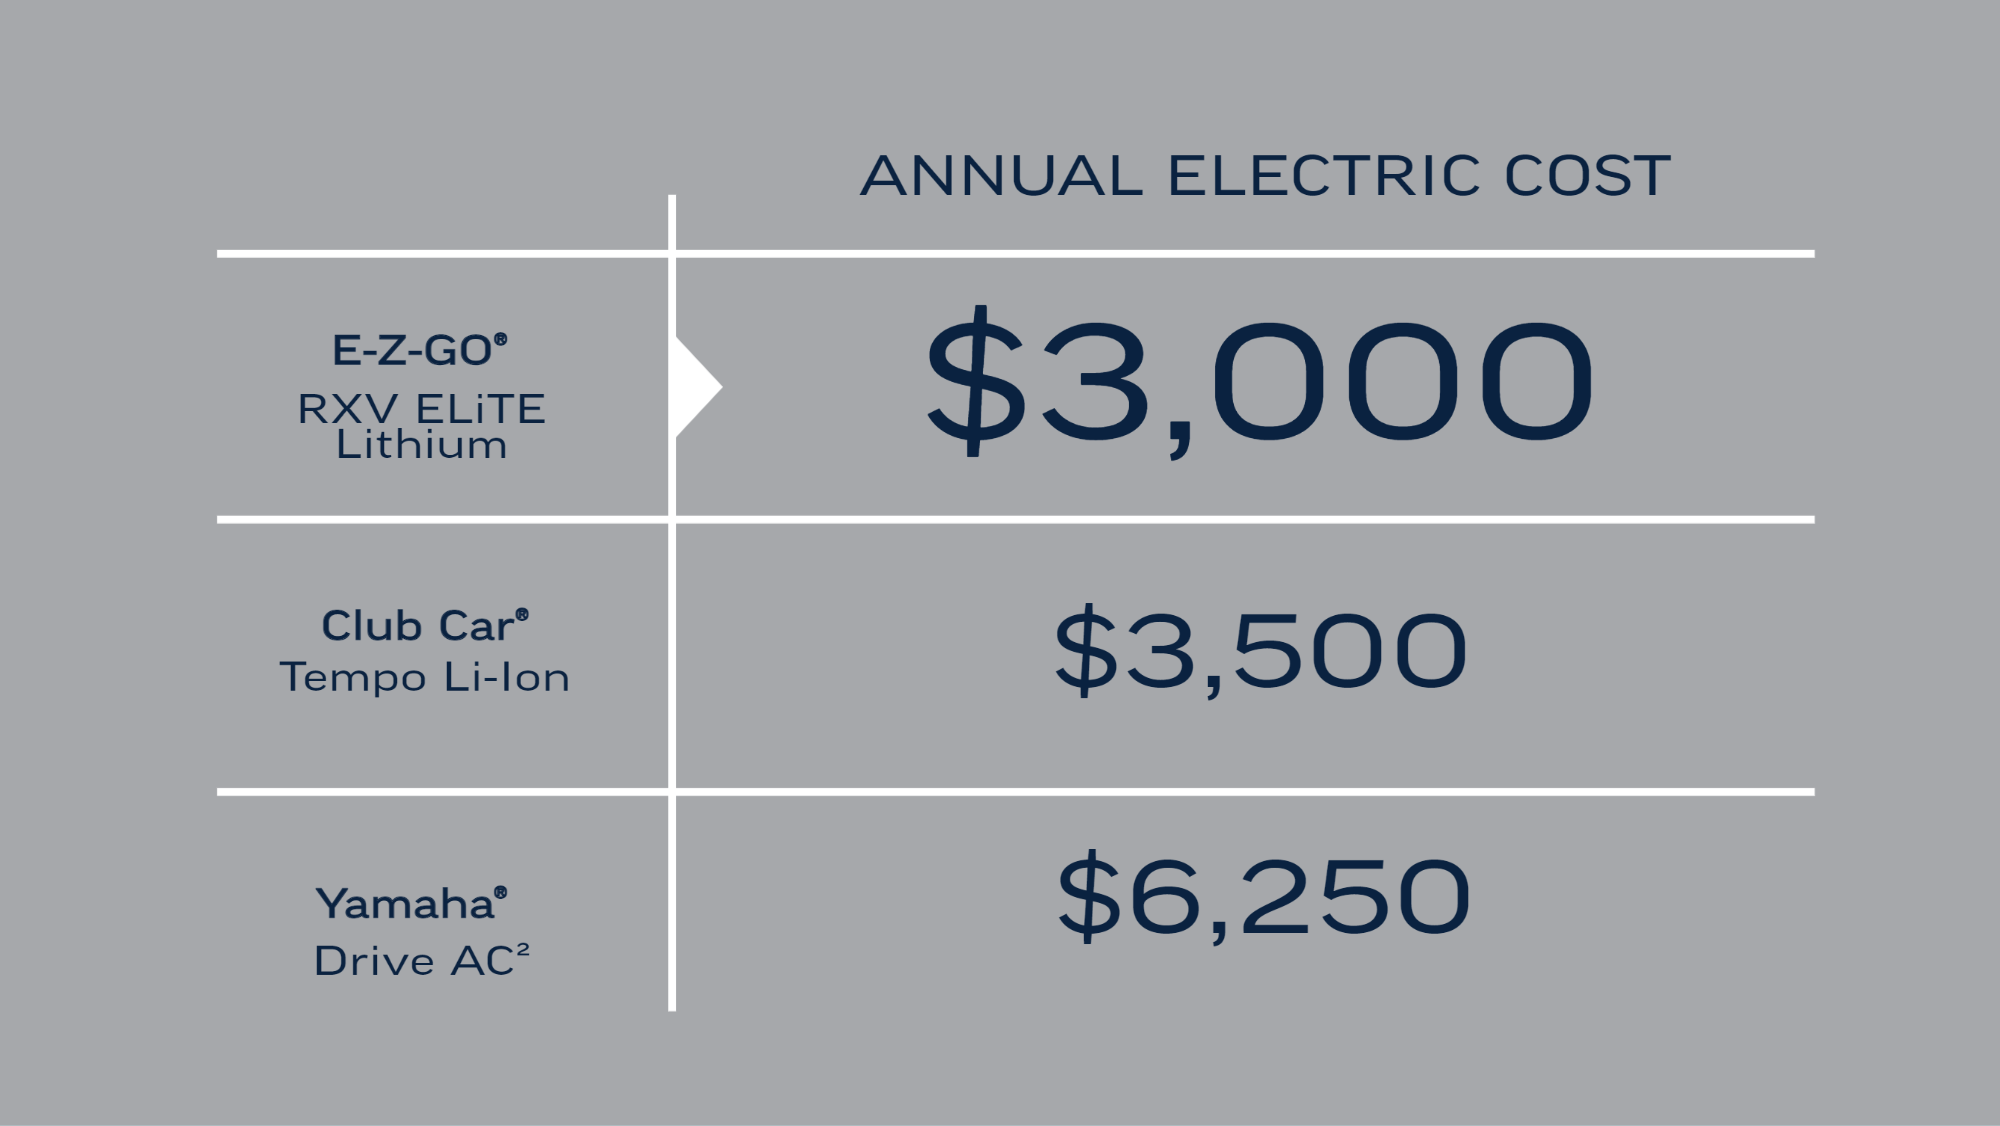 Lowest Cost of Electric with our ELiTE powertrain on our golfcart